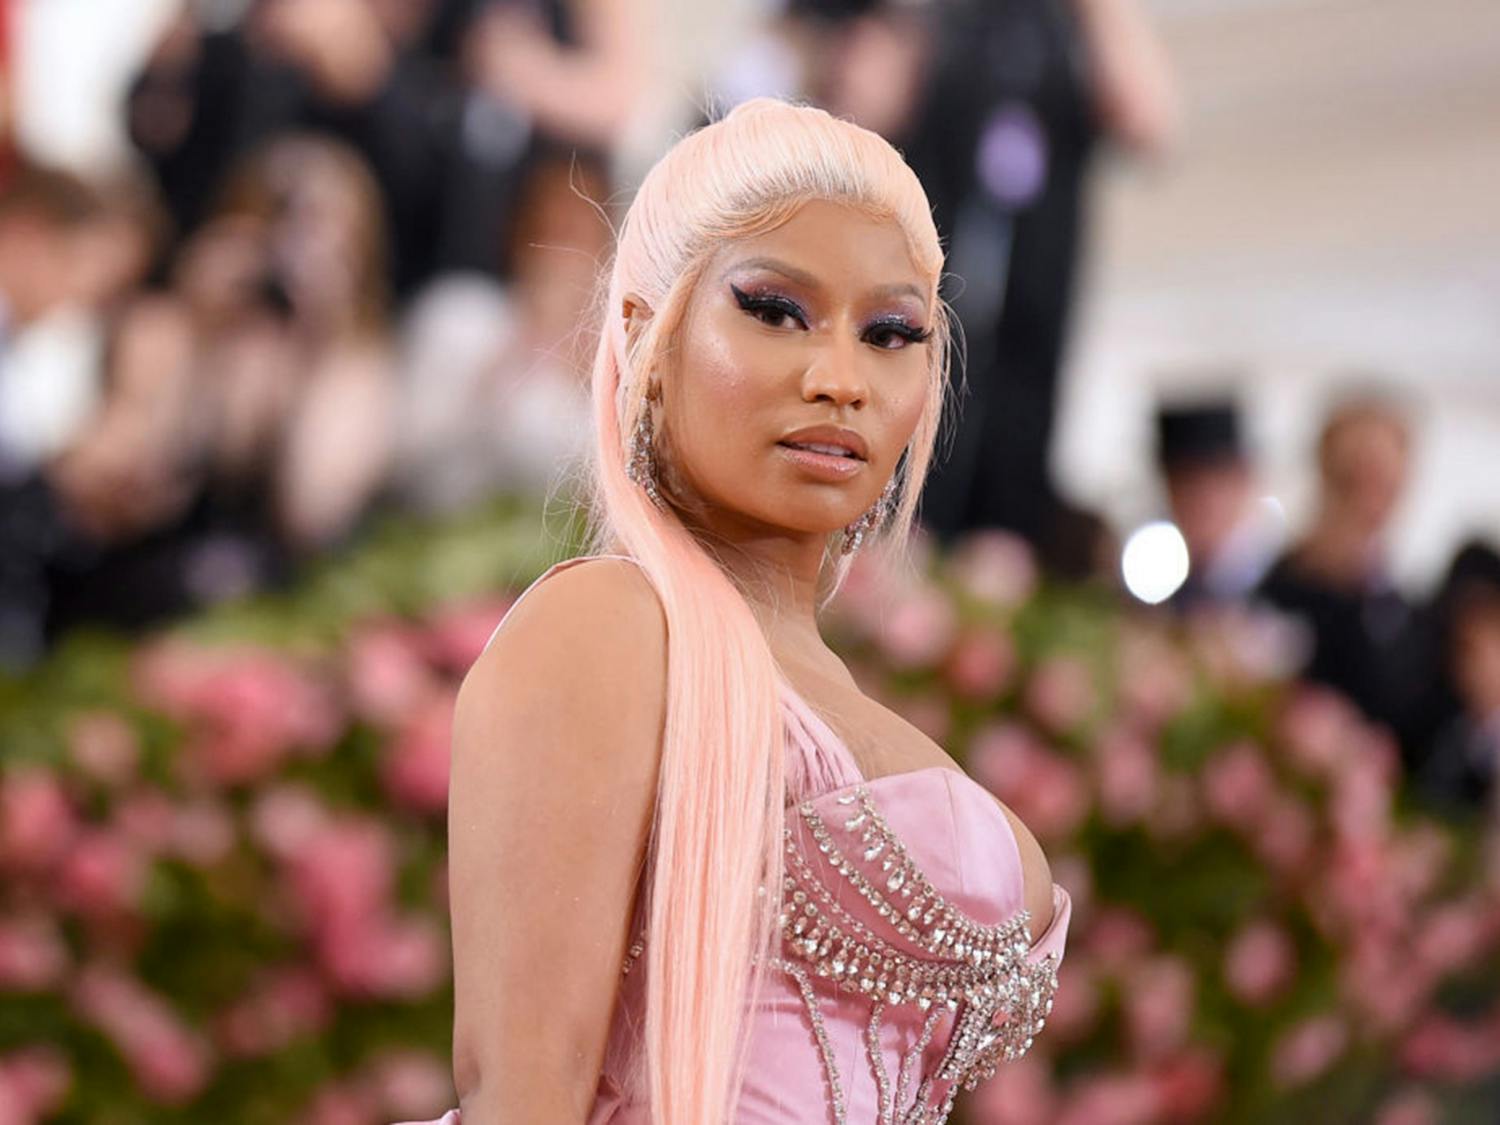 Nicki Minaj attends The 2019 Met Gala at Metropolitan Museum of Art on May 6, 2019 in New York City. Minaj released two new singles in February 2022, leading fans to believe a new album is on the way. (Jamie McCarthy/Getty Images/TNS)